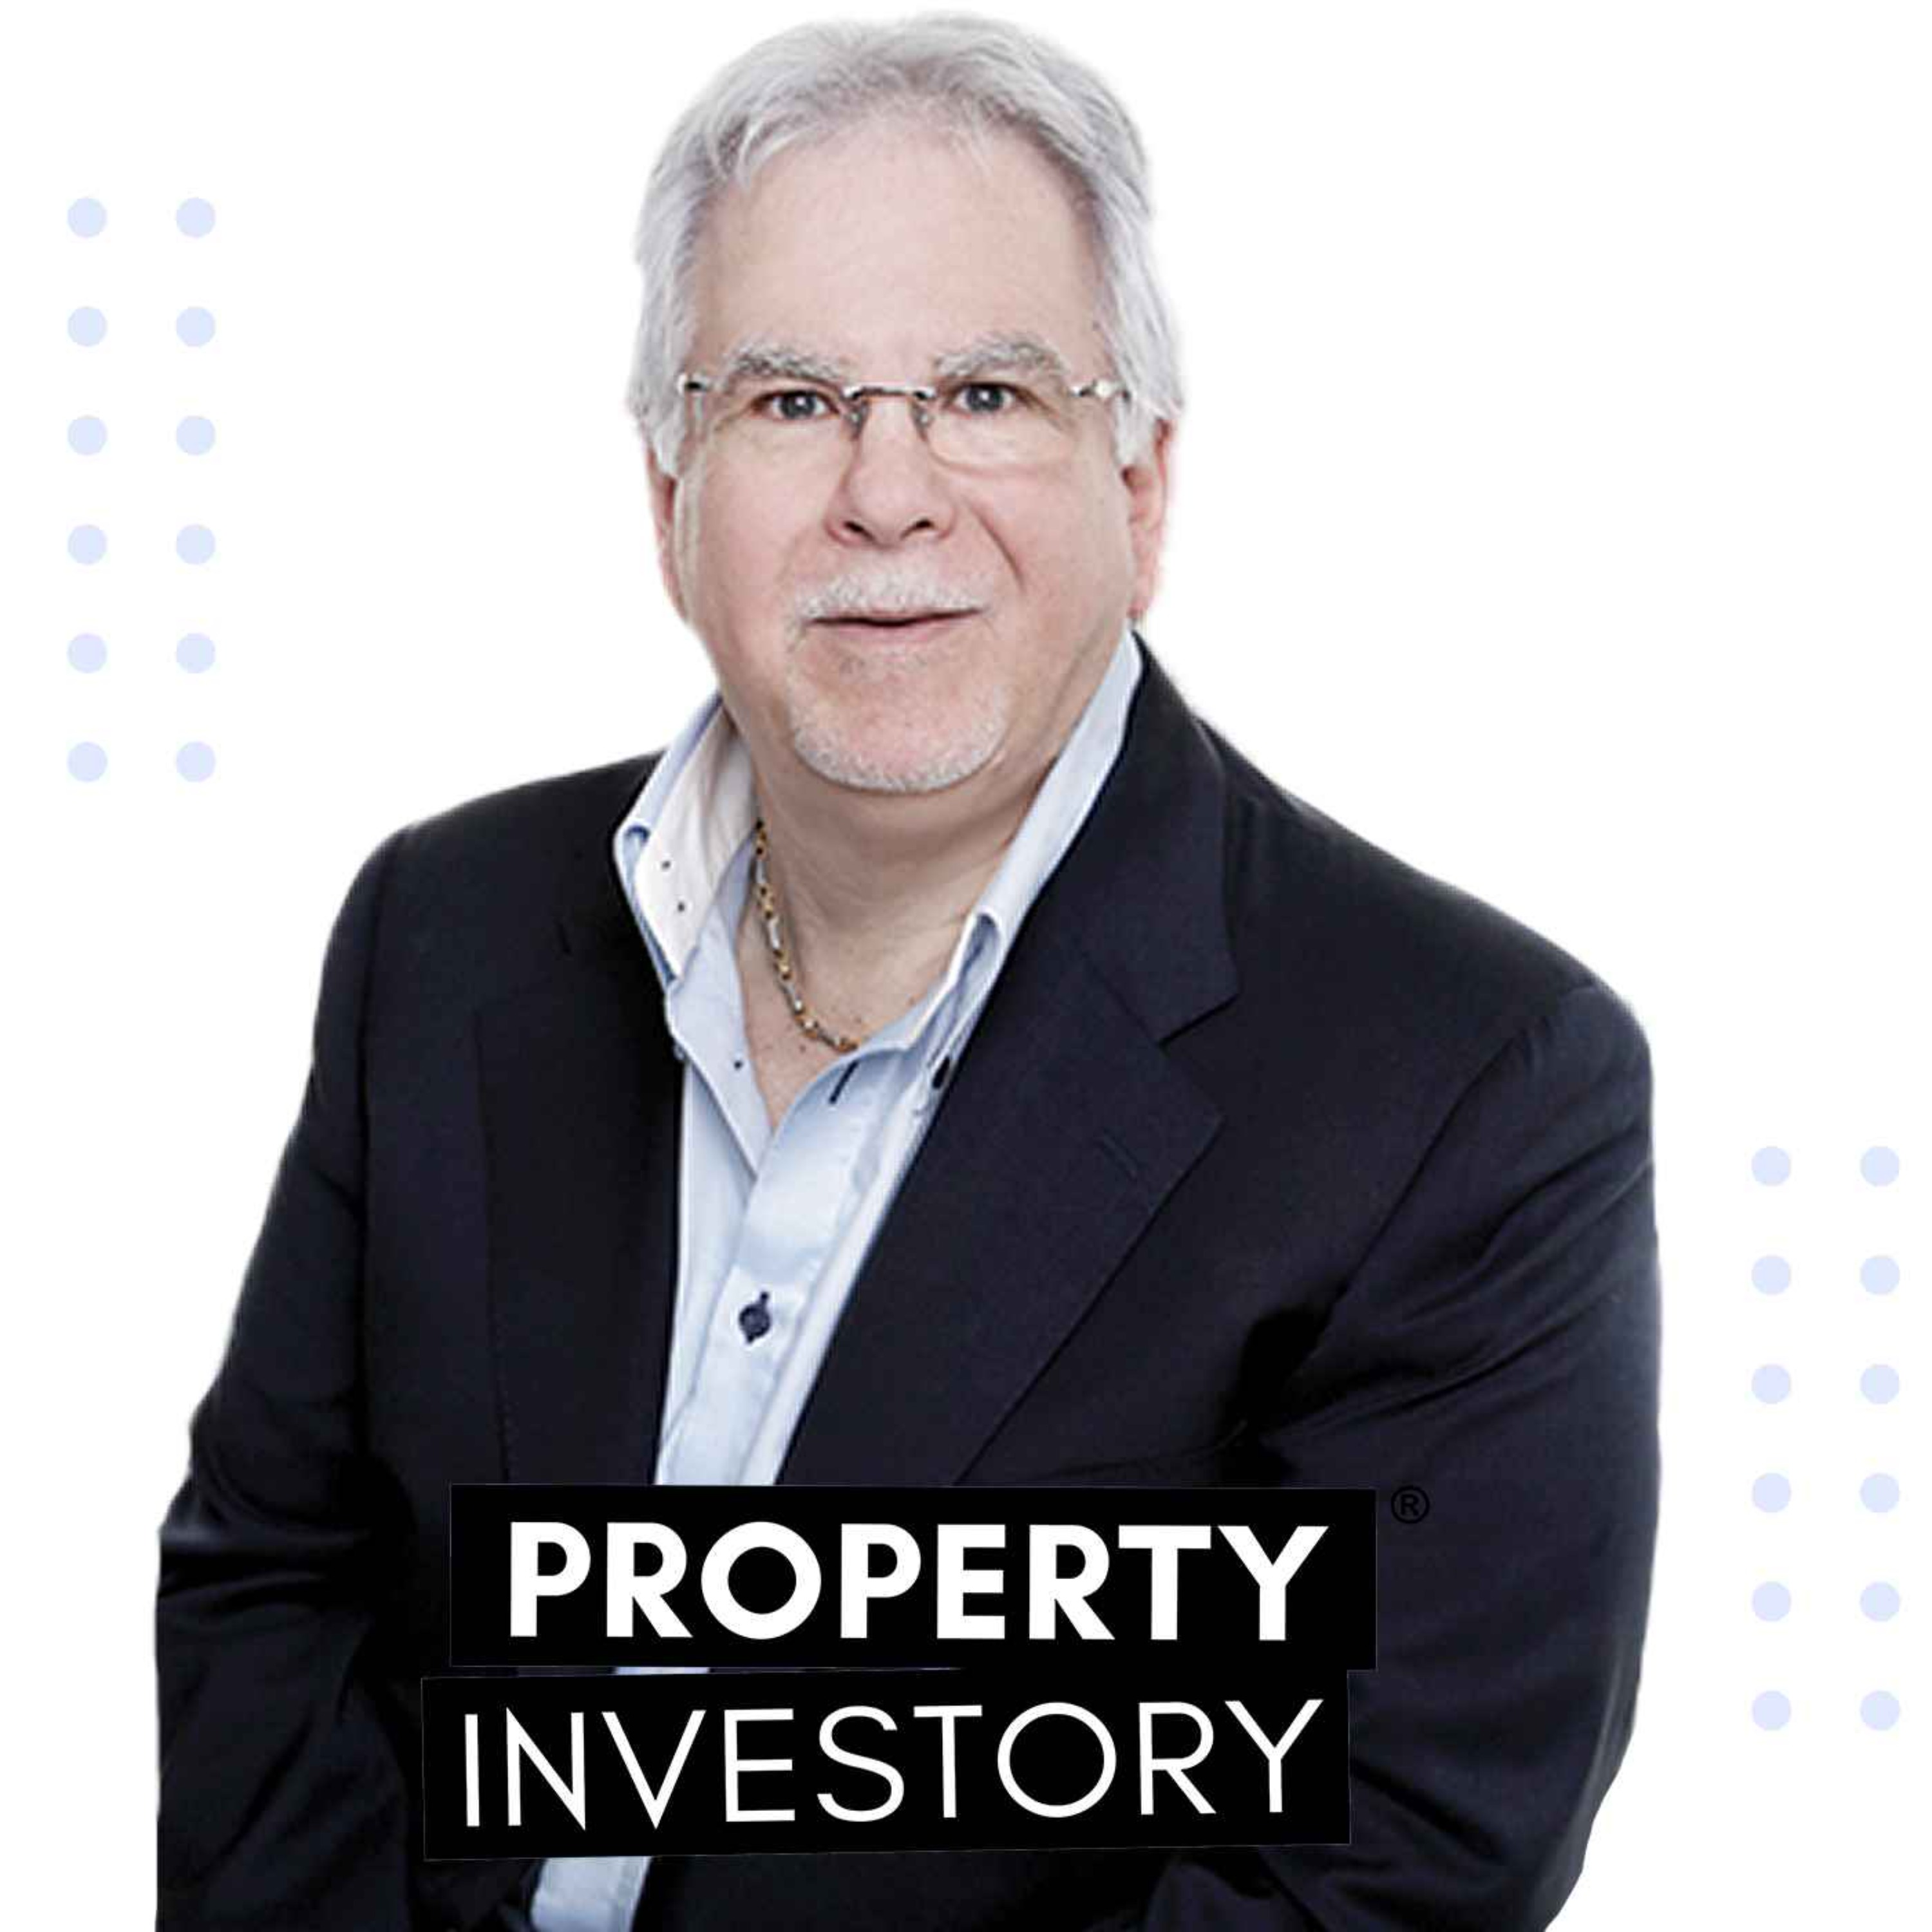 Michael Yardney: A $18K Property to $4M Investment